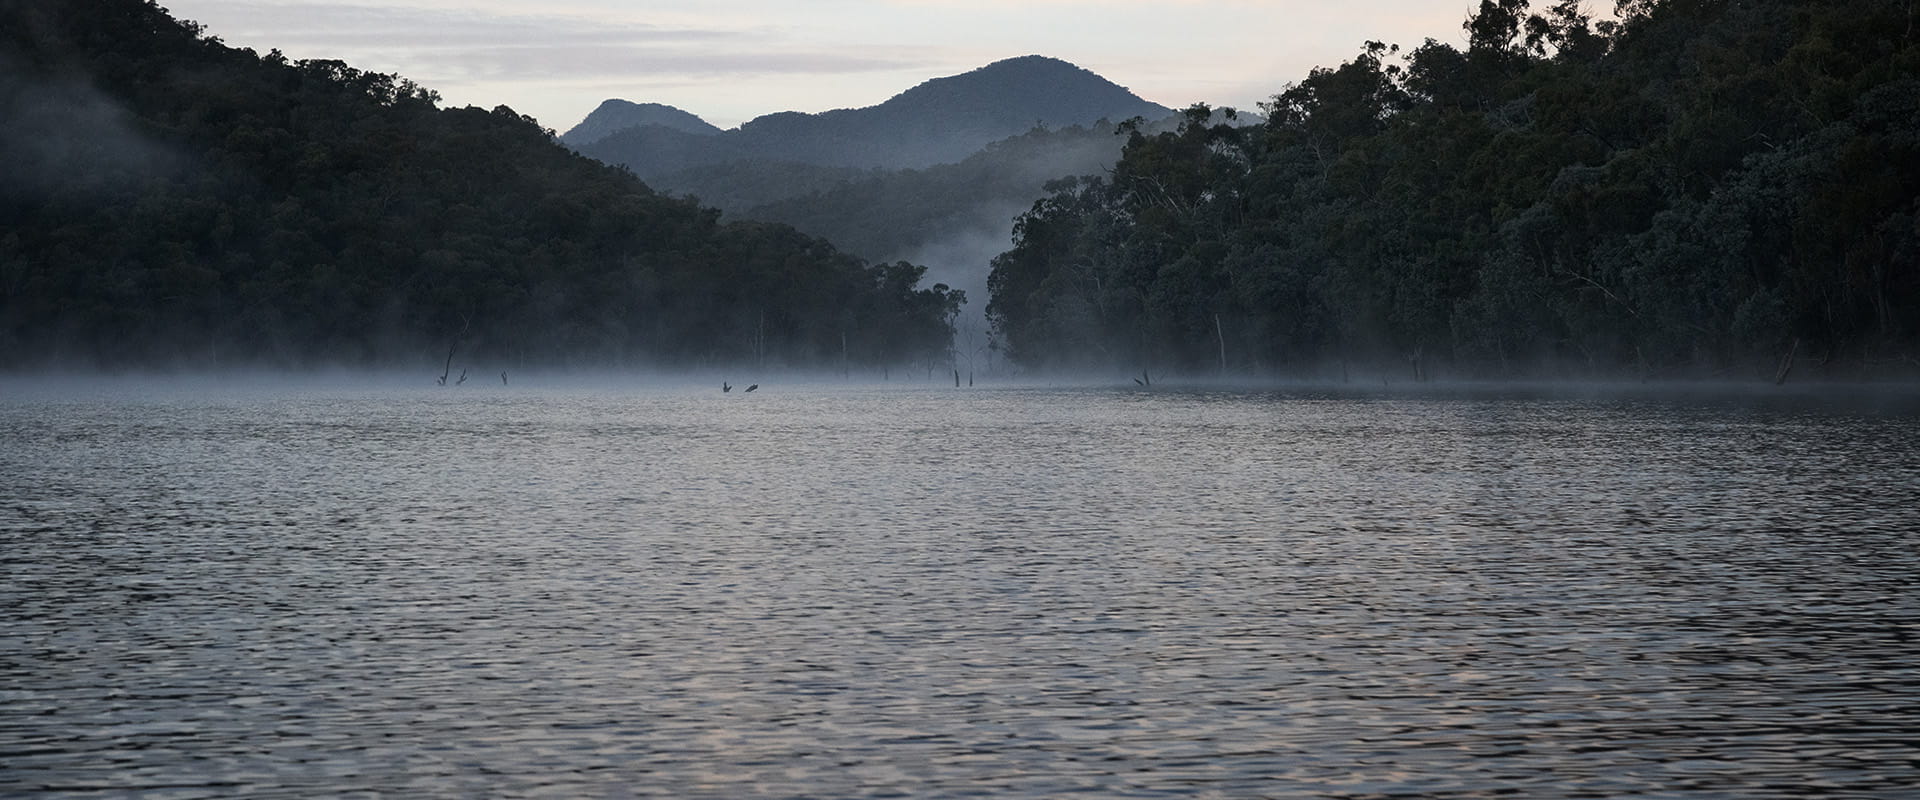 Mist rises on a lake in the foreground. Forested mountains rise in the background and far off in the distance. 